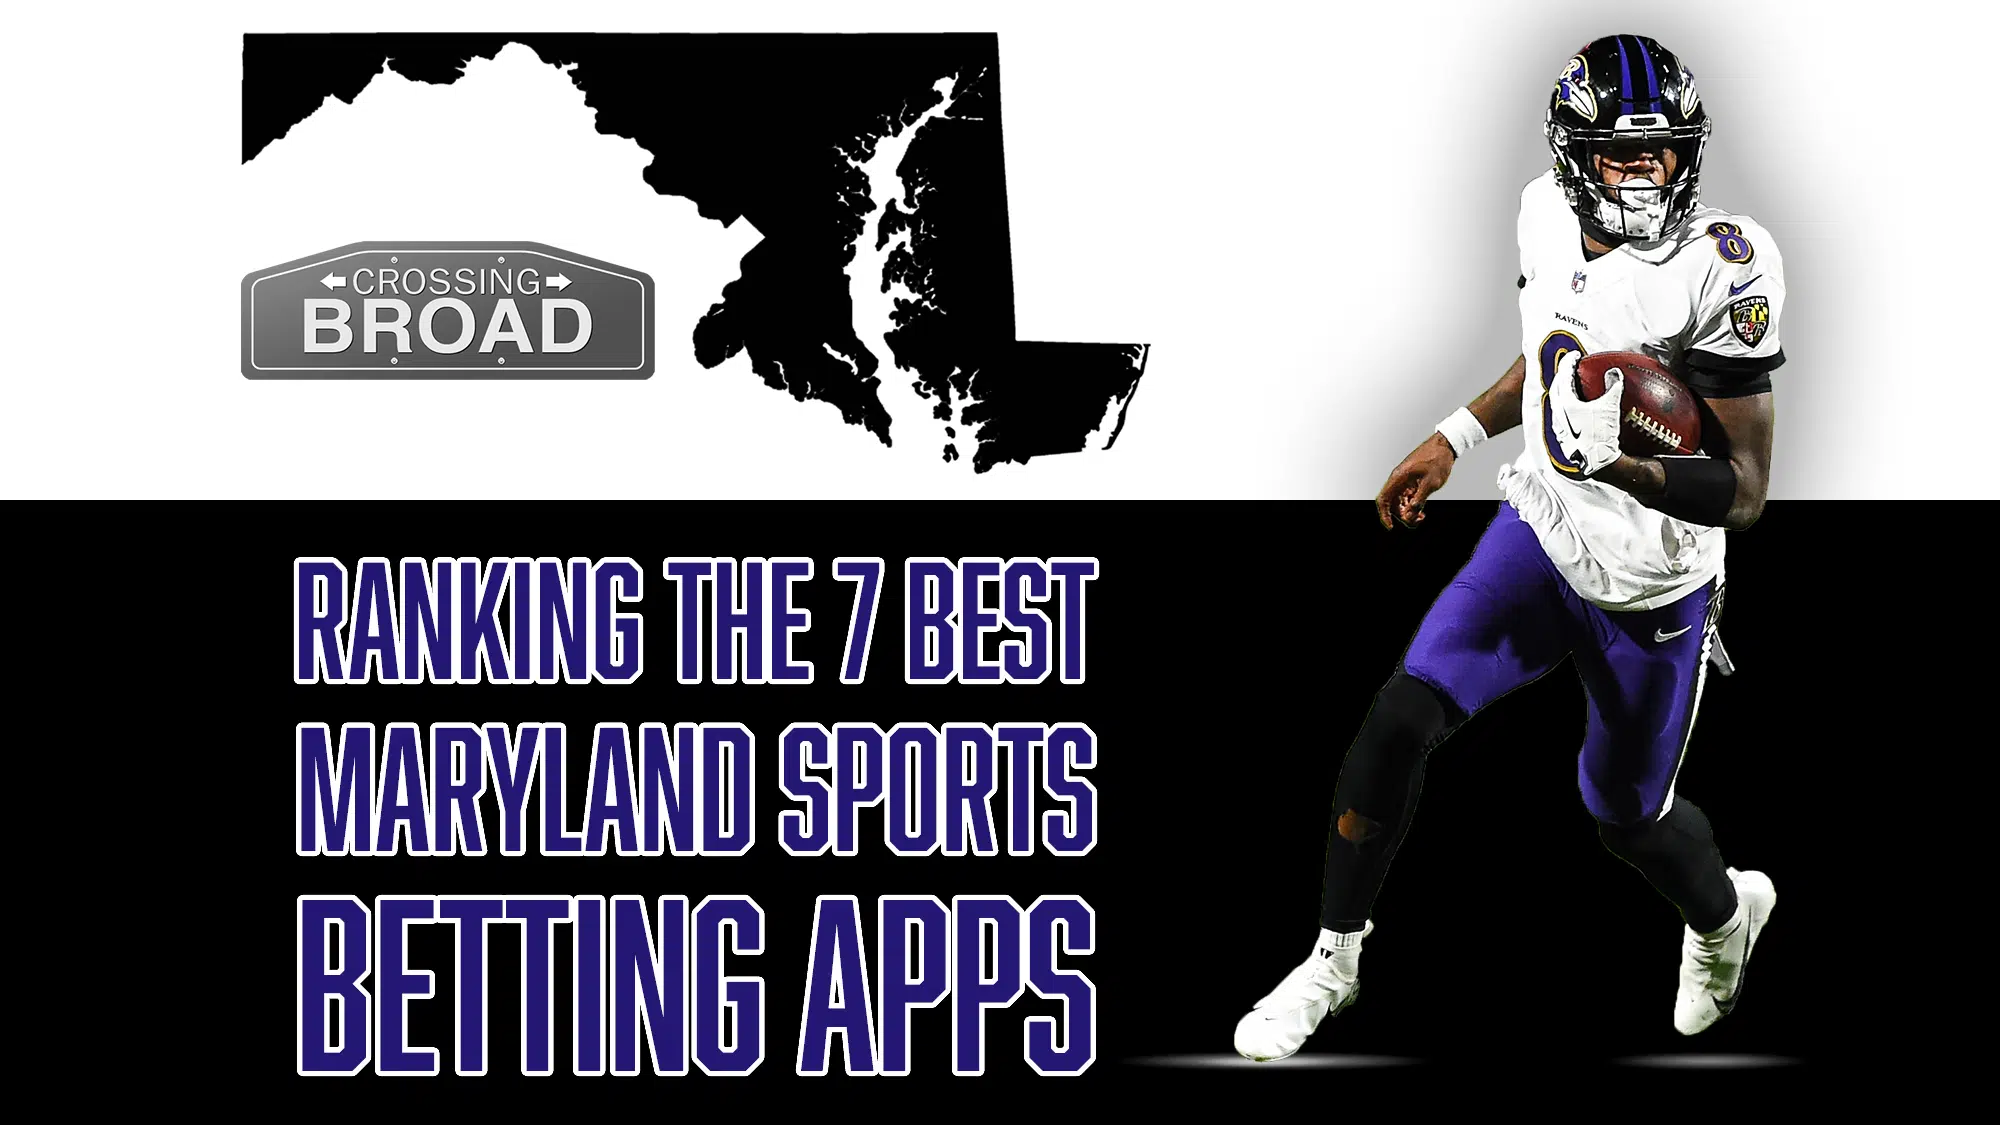 Ranking the 7 best Maryland sports betting apps for mobile devices, Lamar Jackson